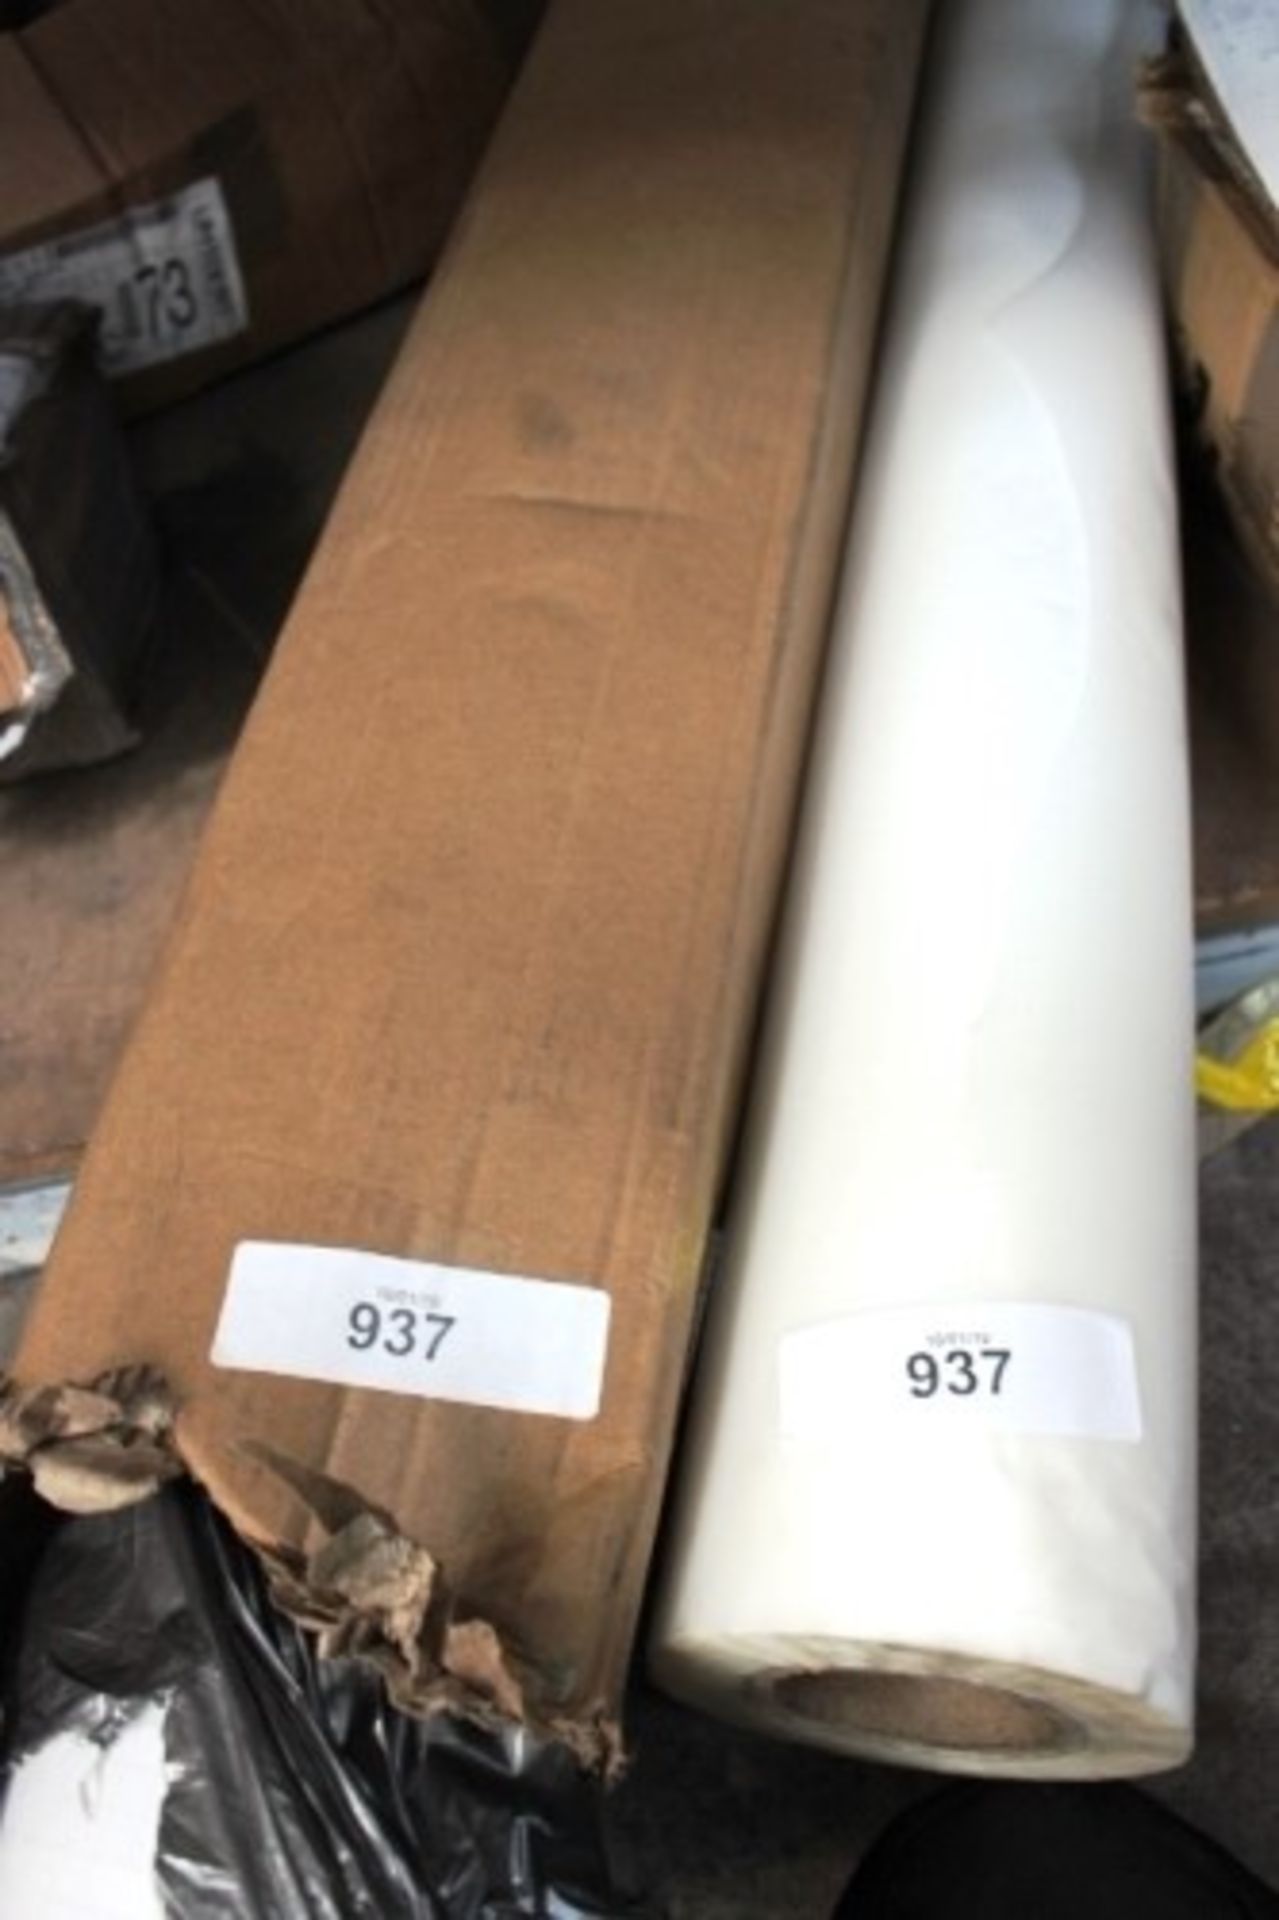 A roll of matte cold lamination film 005 1524mm x 50m, together with an unidentified roll of plastic